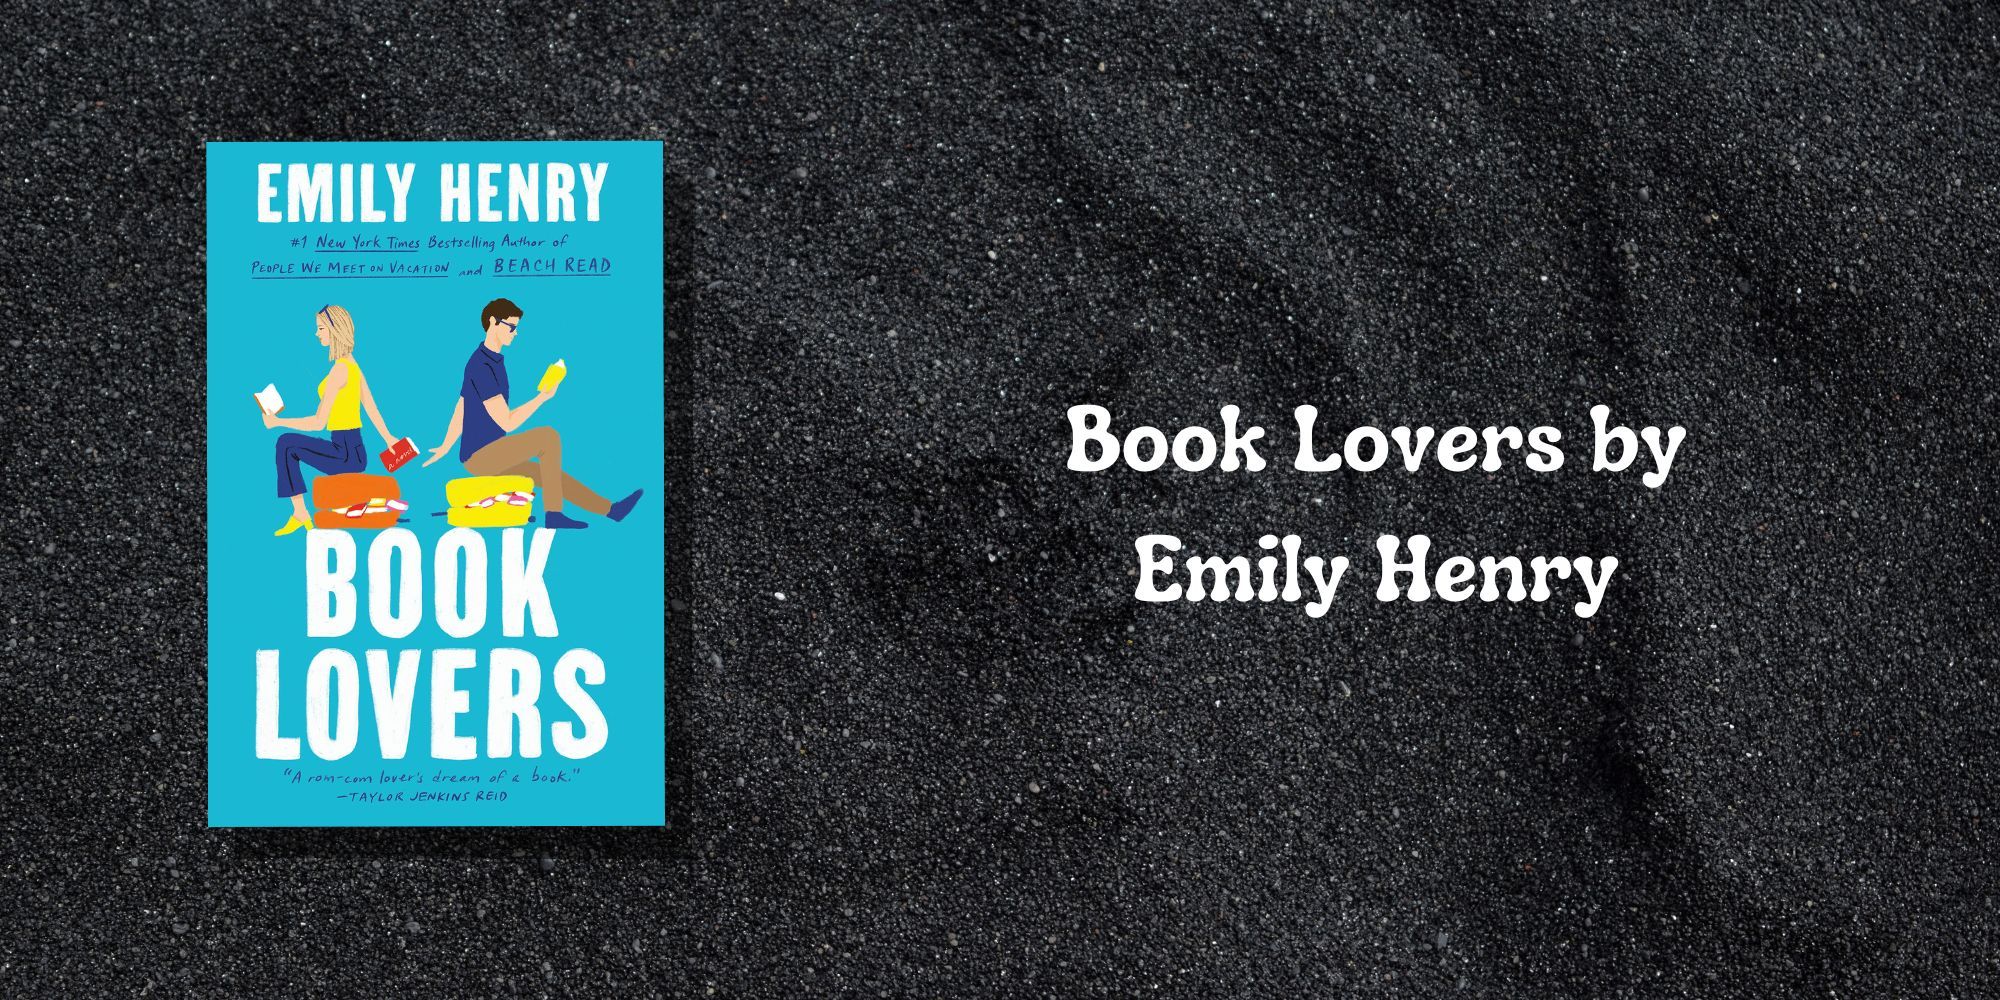 Emily Henry book lovers cover